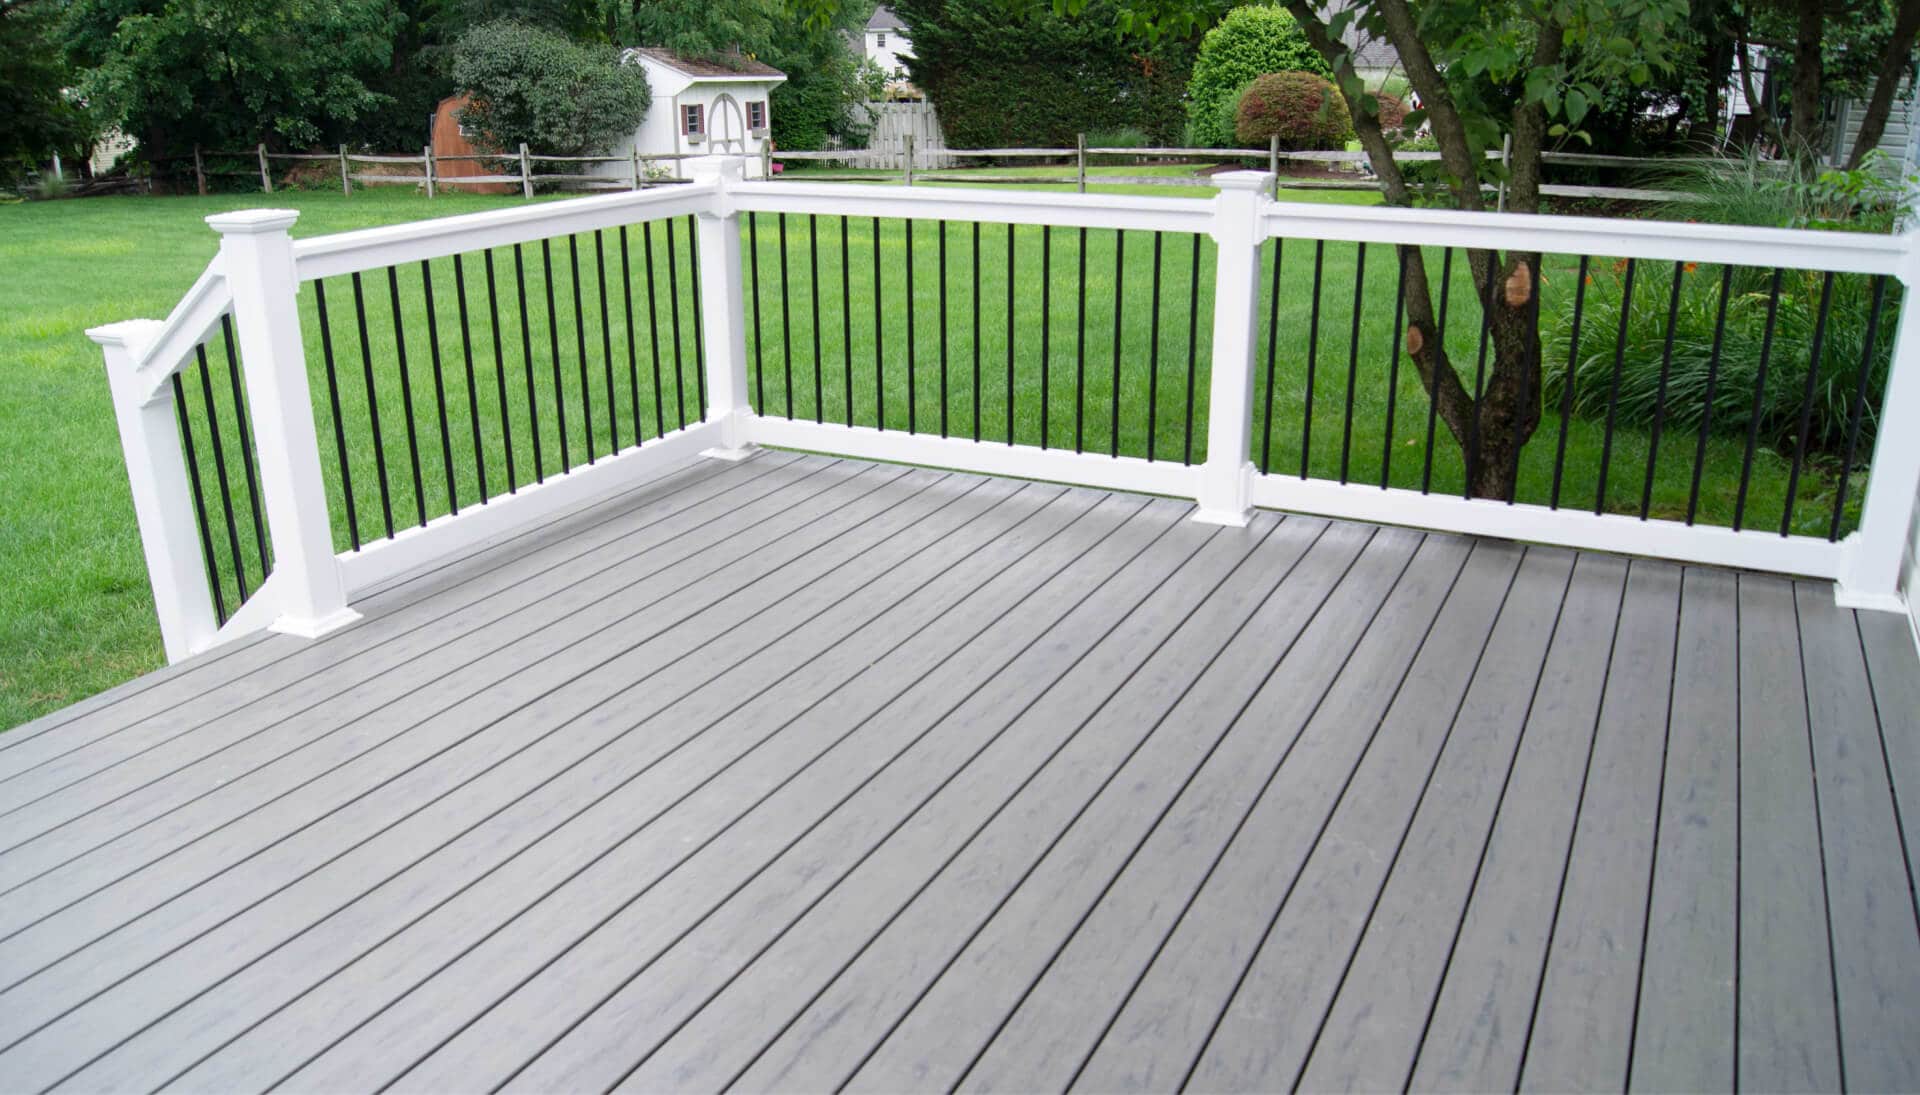 Experts in deck railing and covers Baltimore, MD